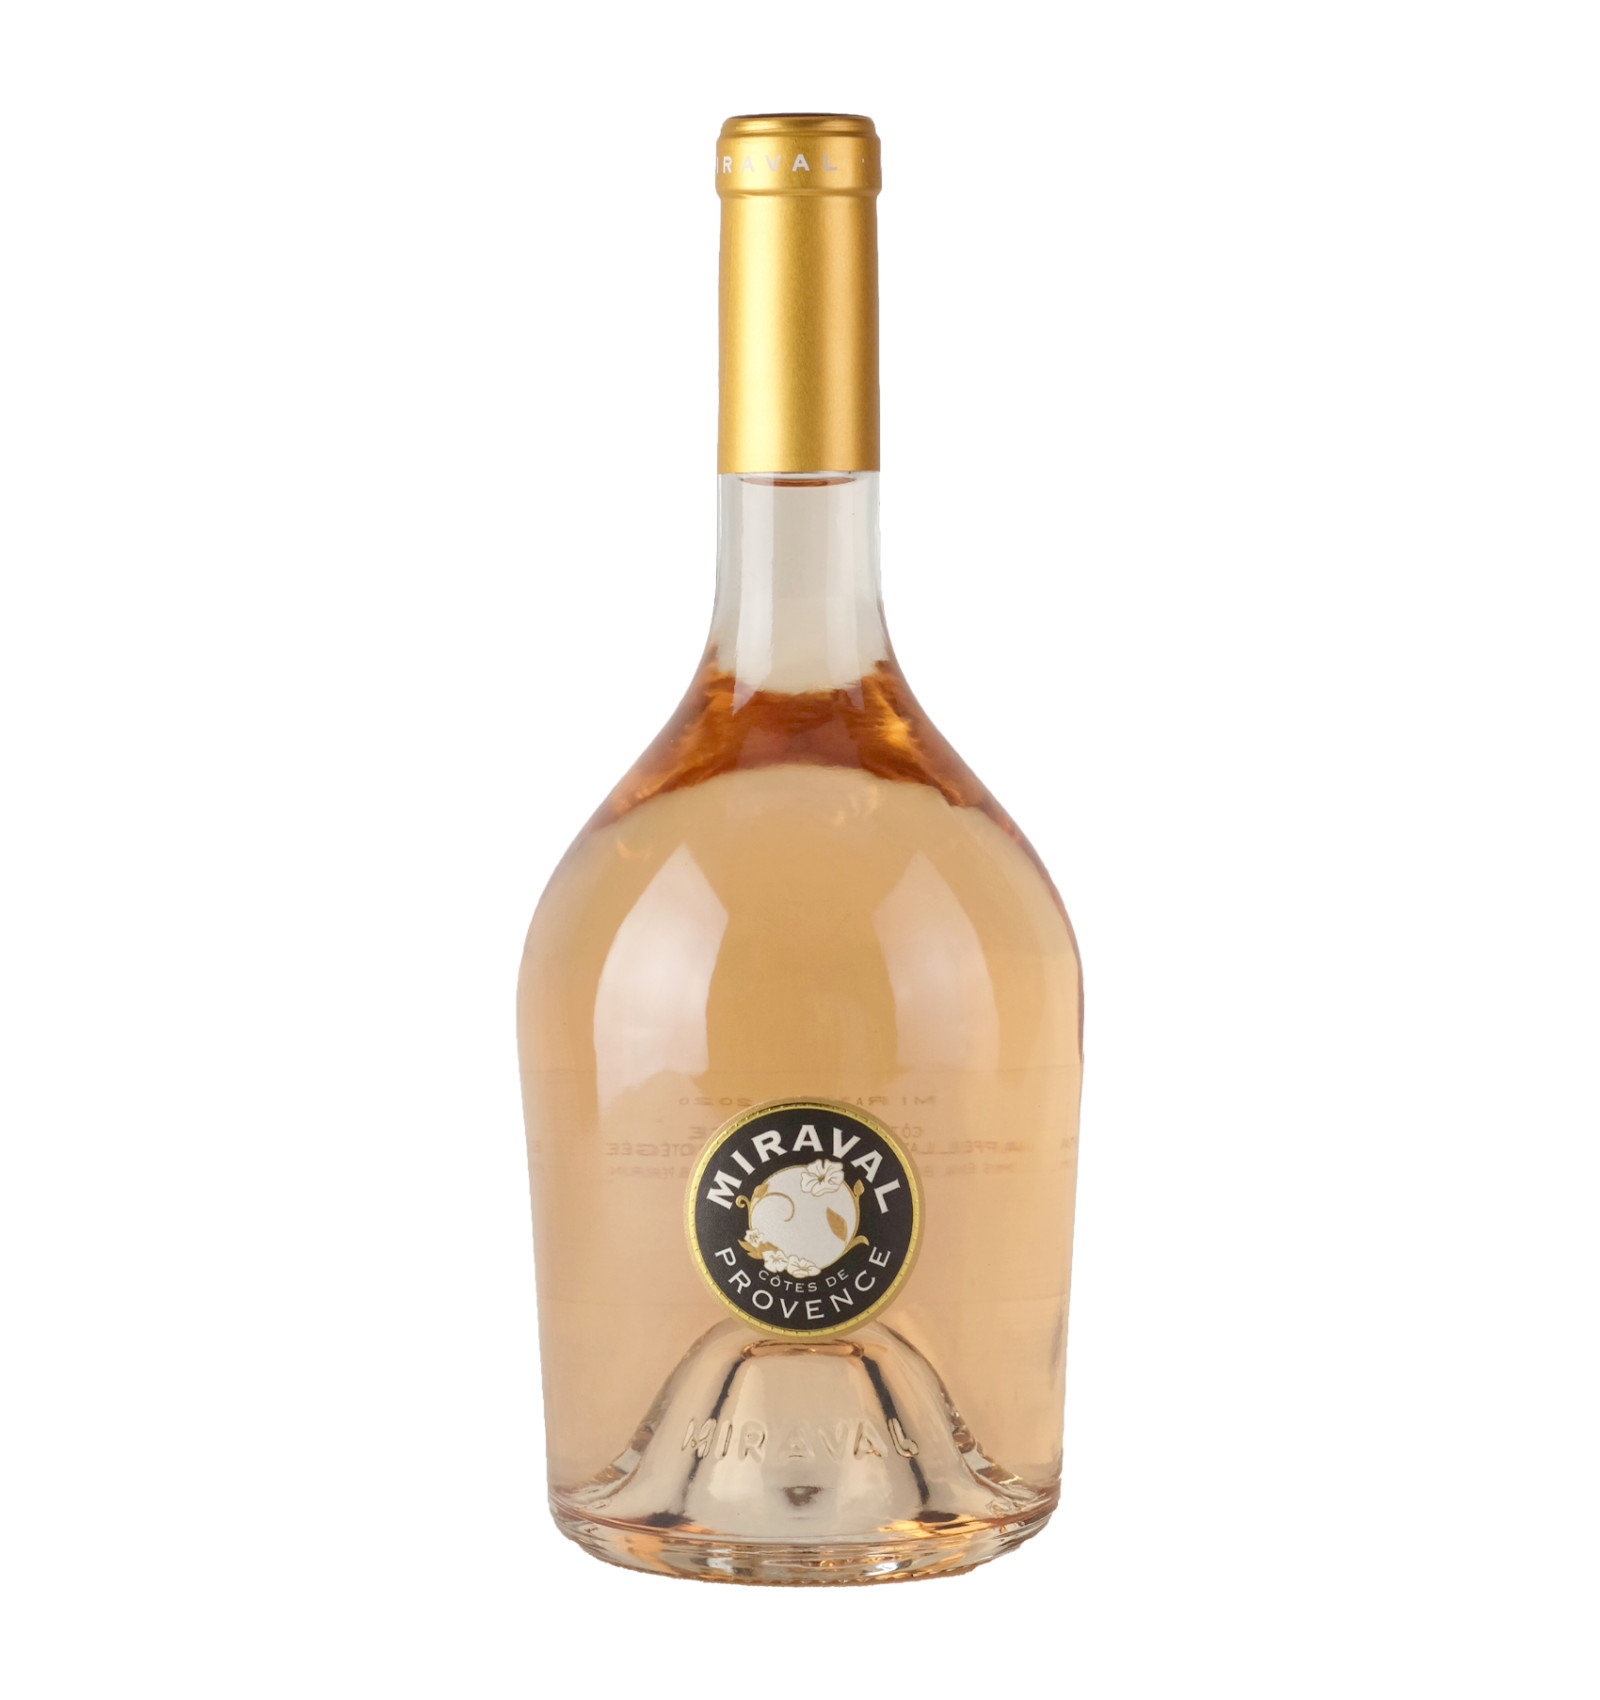 Chateau miraval rose